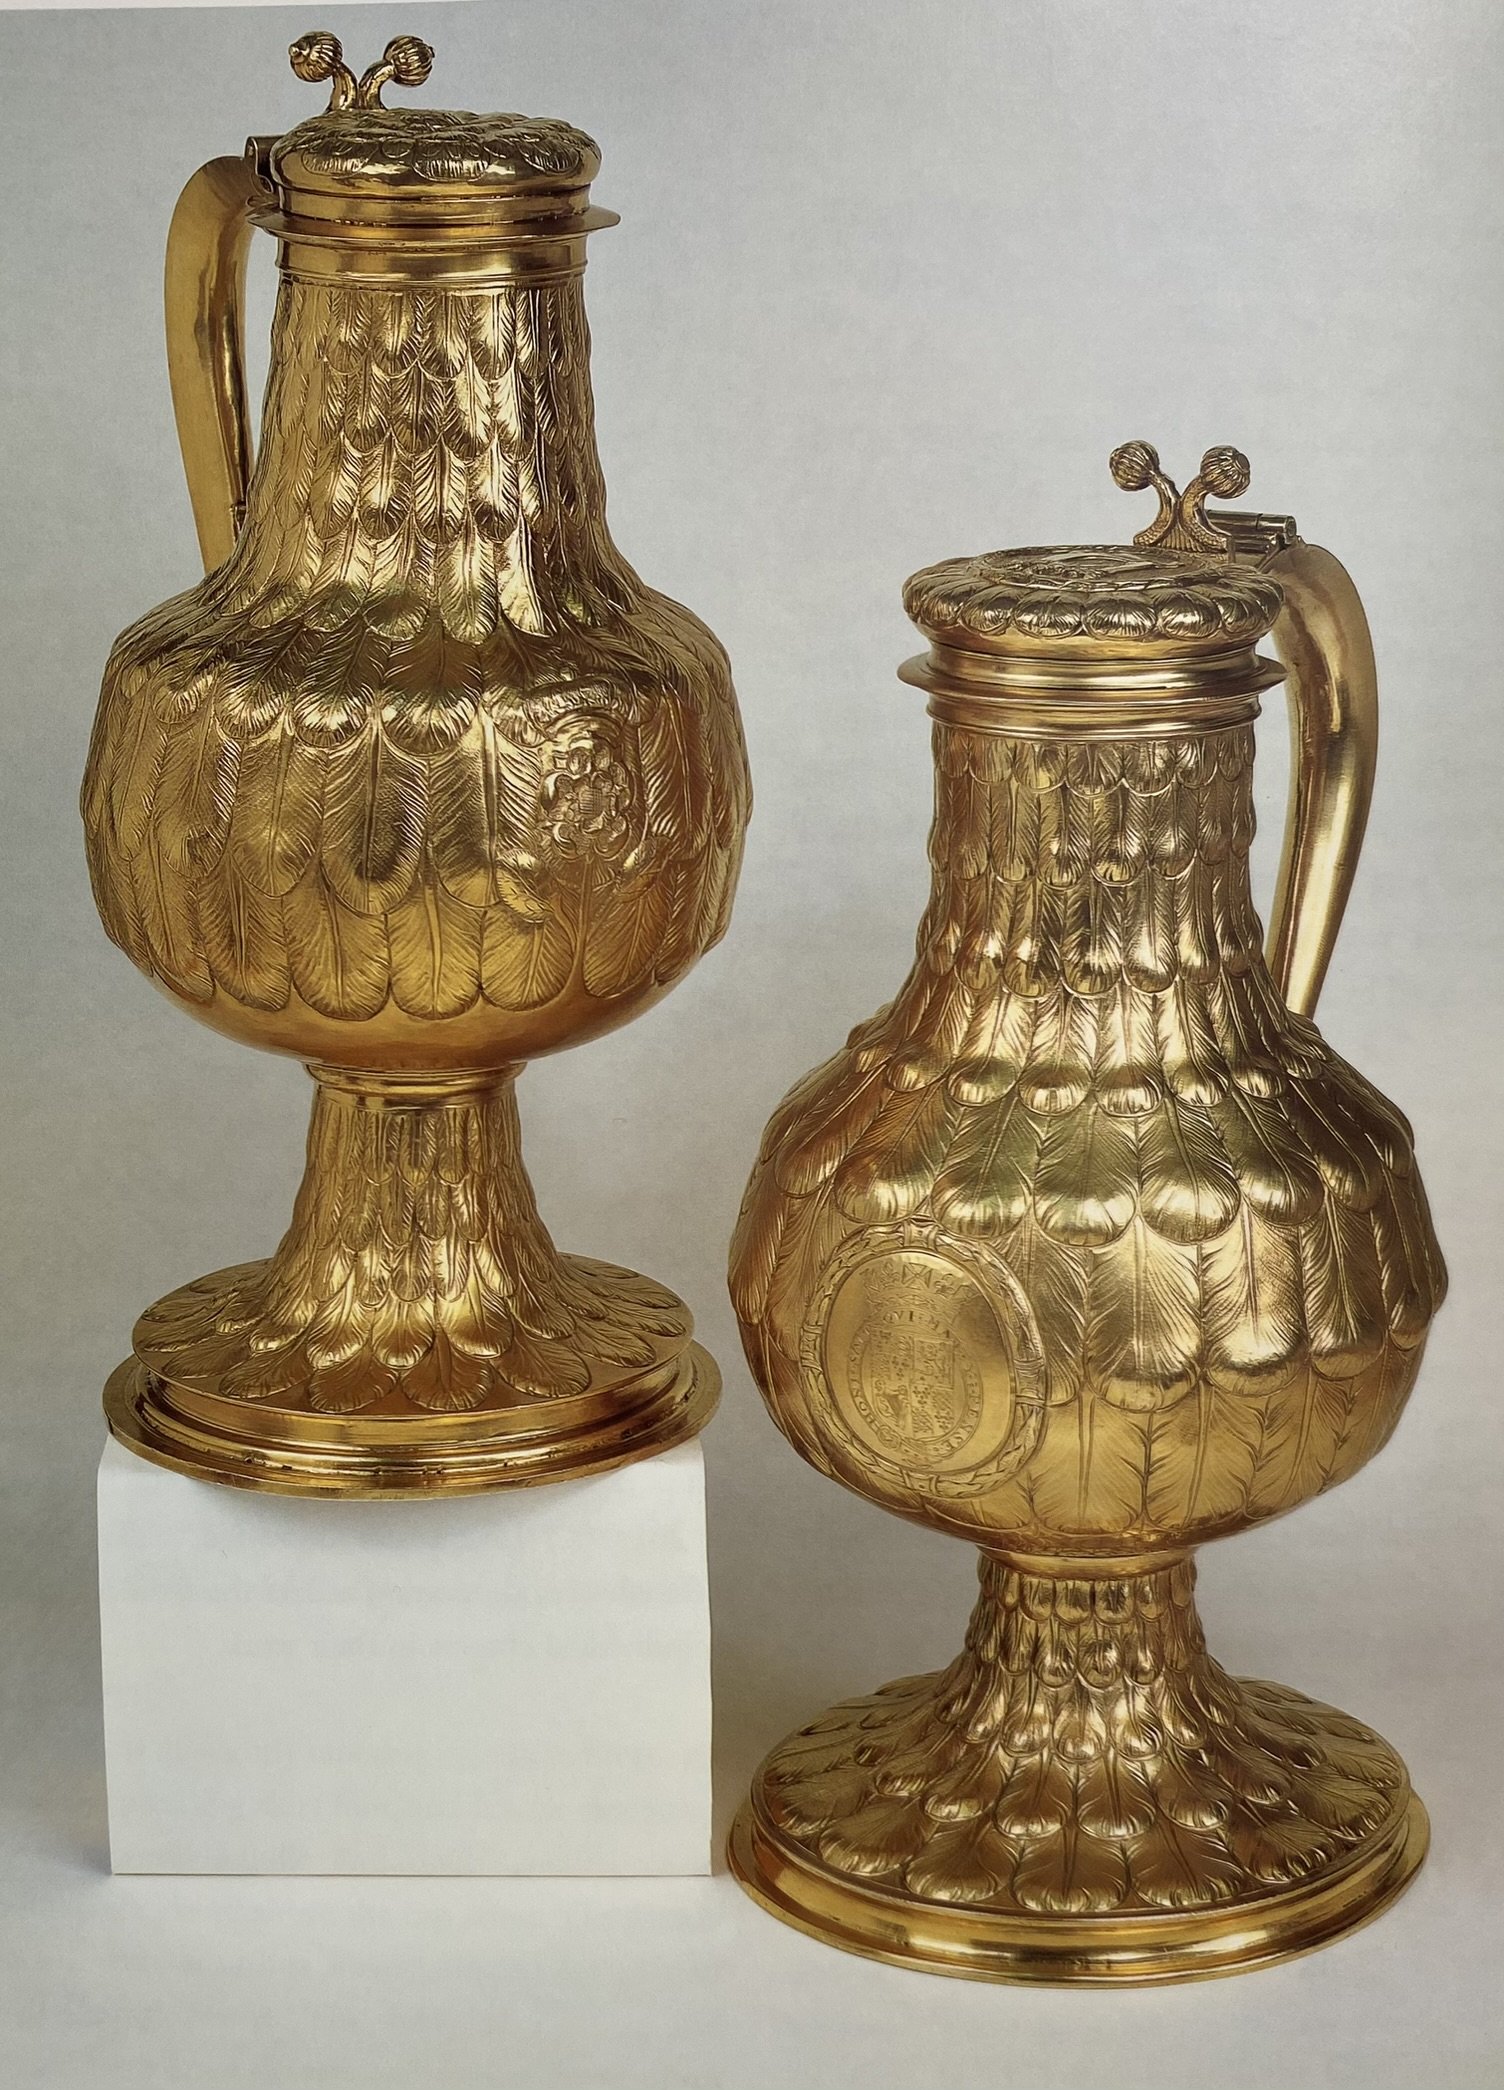 Pair of Feathered Flagons - communion wine jugs with distinctive shaped bellied bodies